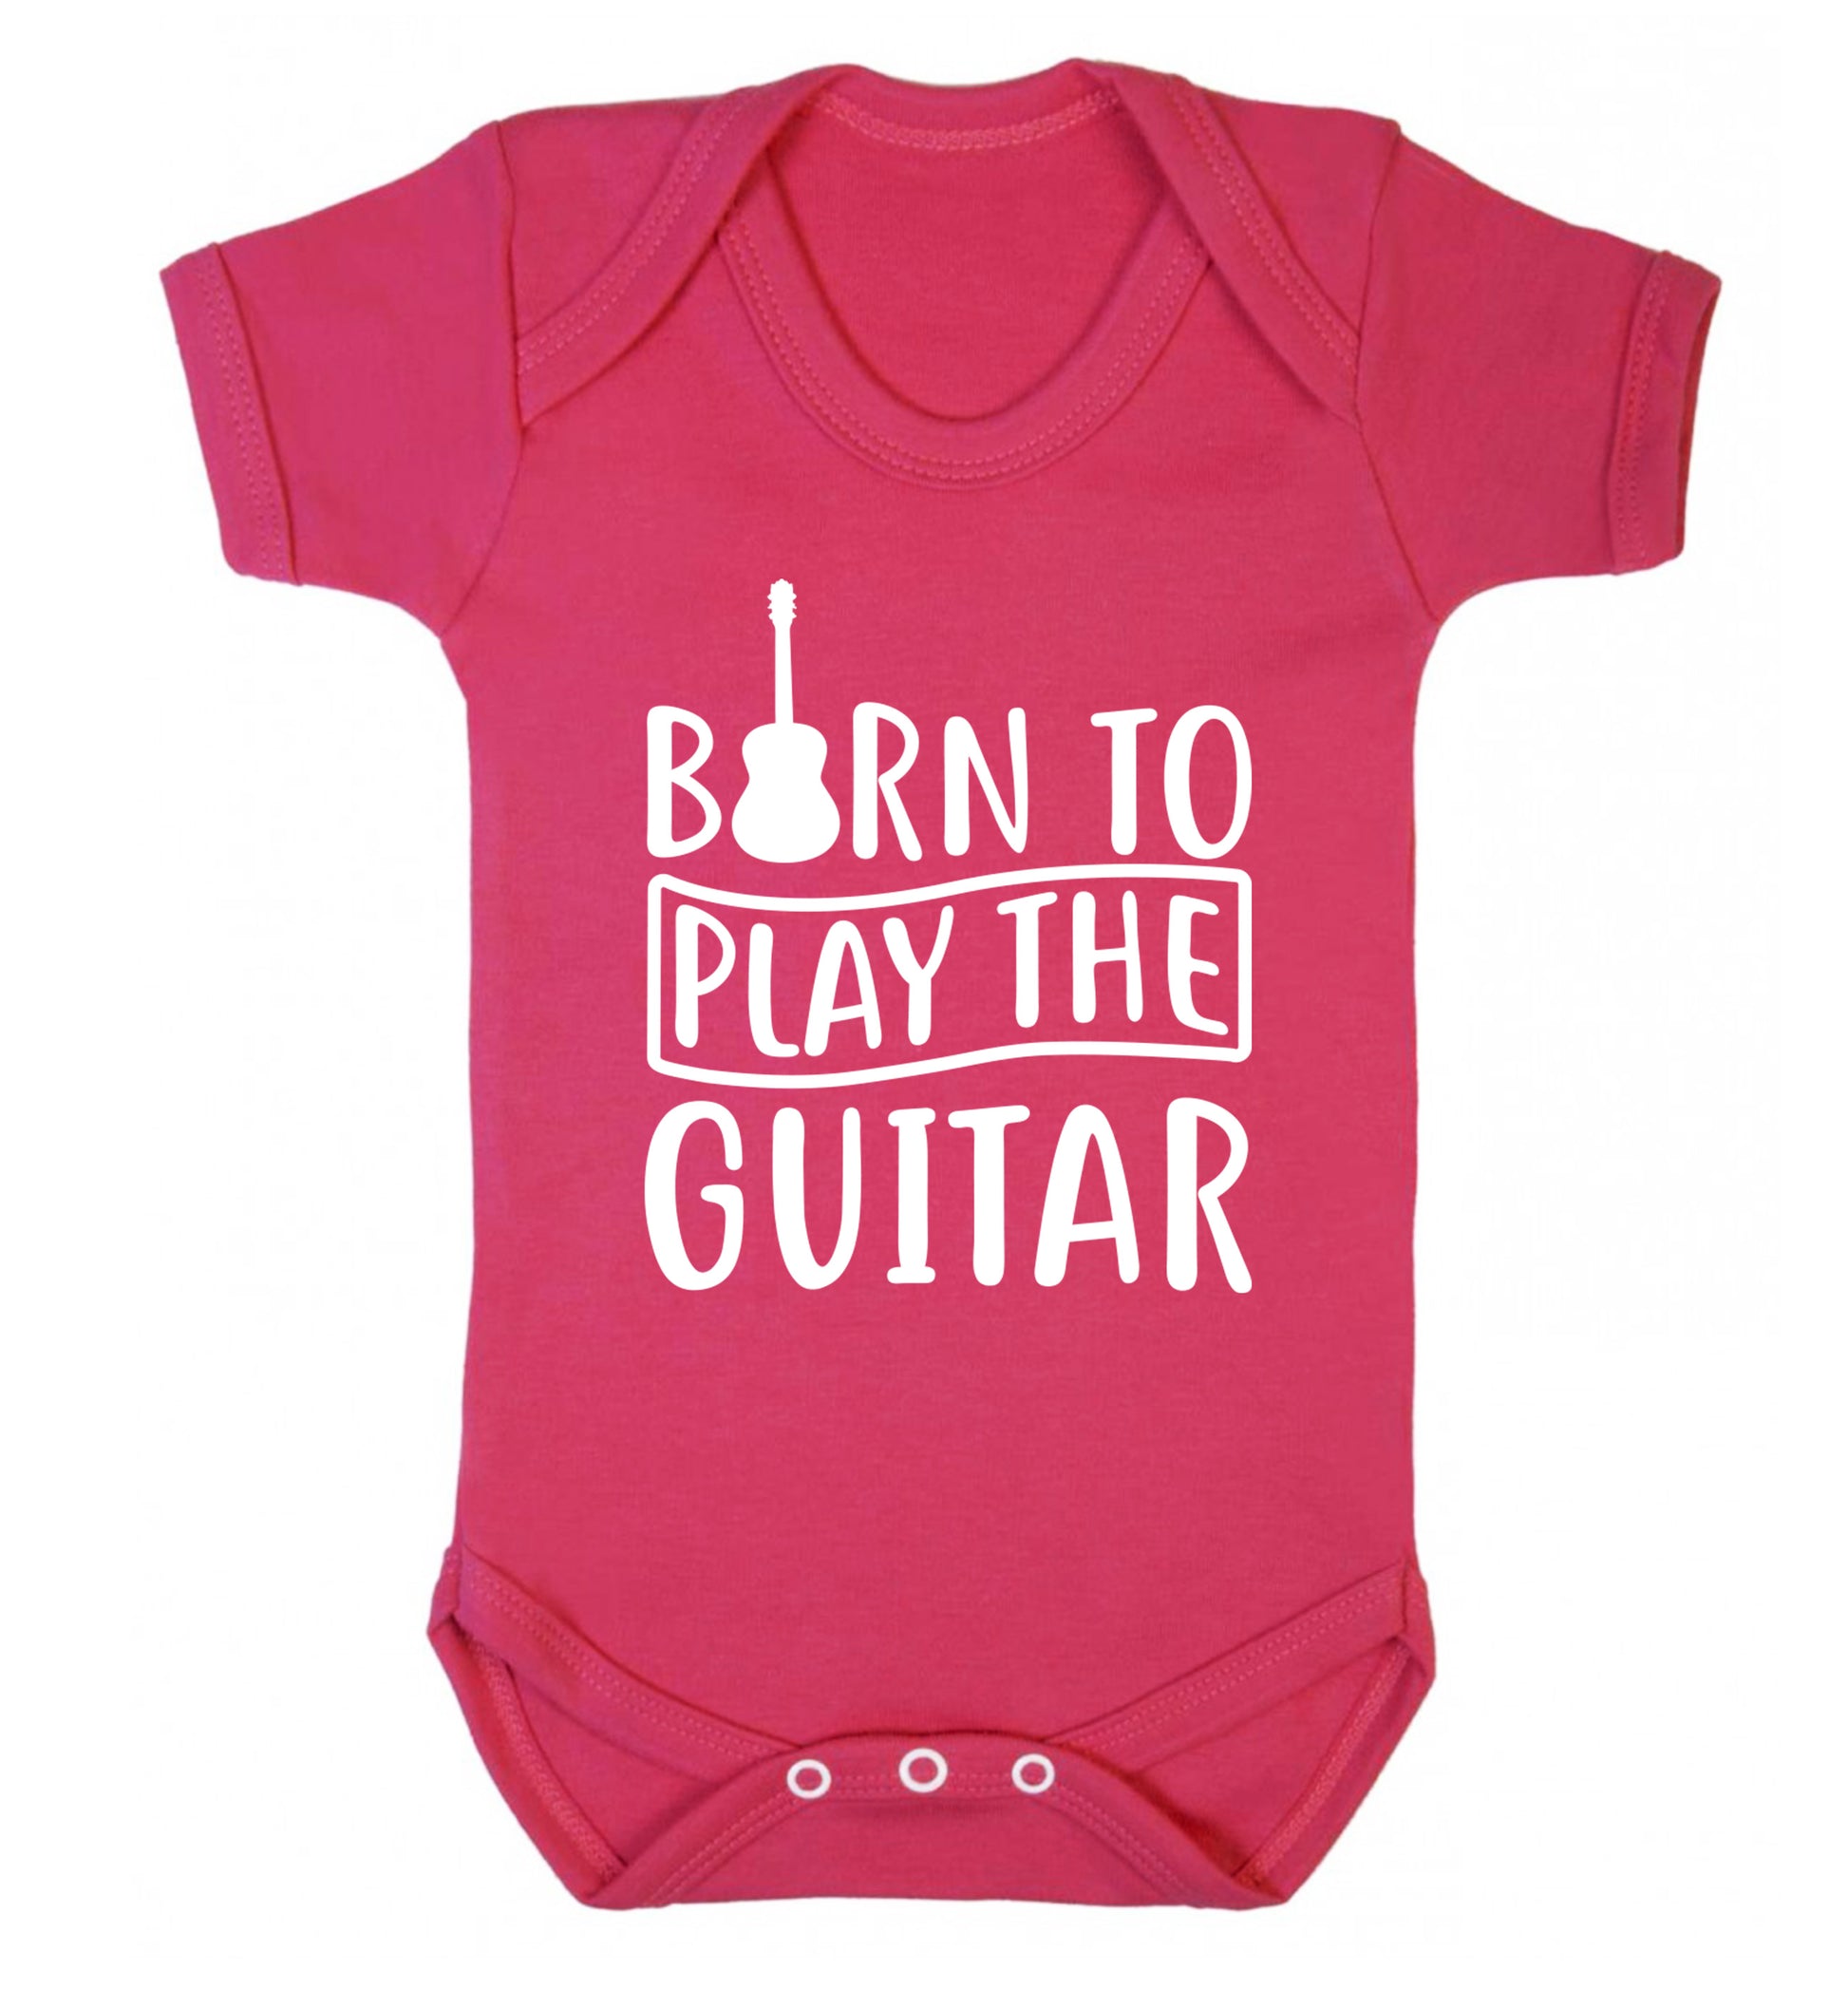 Born to play the guitar Baby Vest dark pink 18-24 months